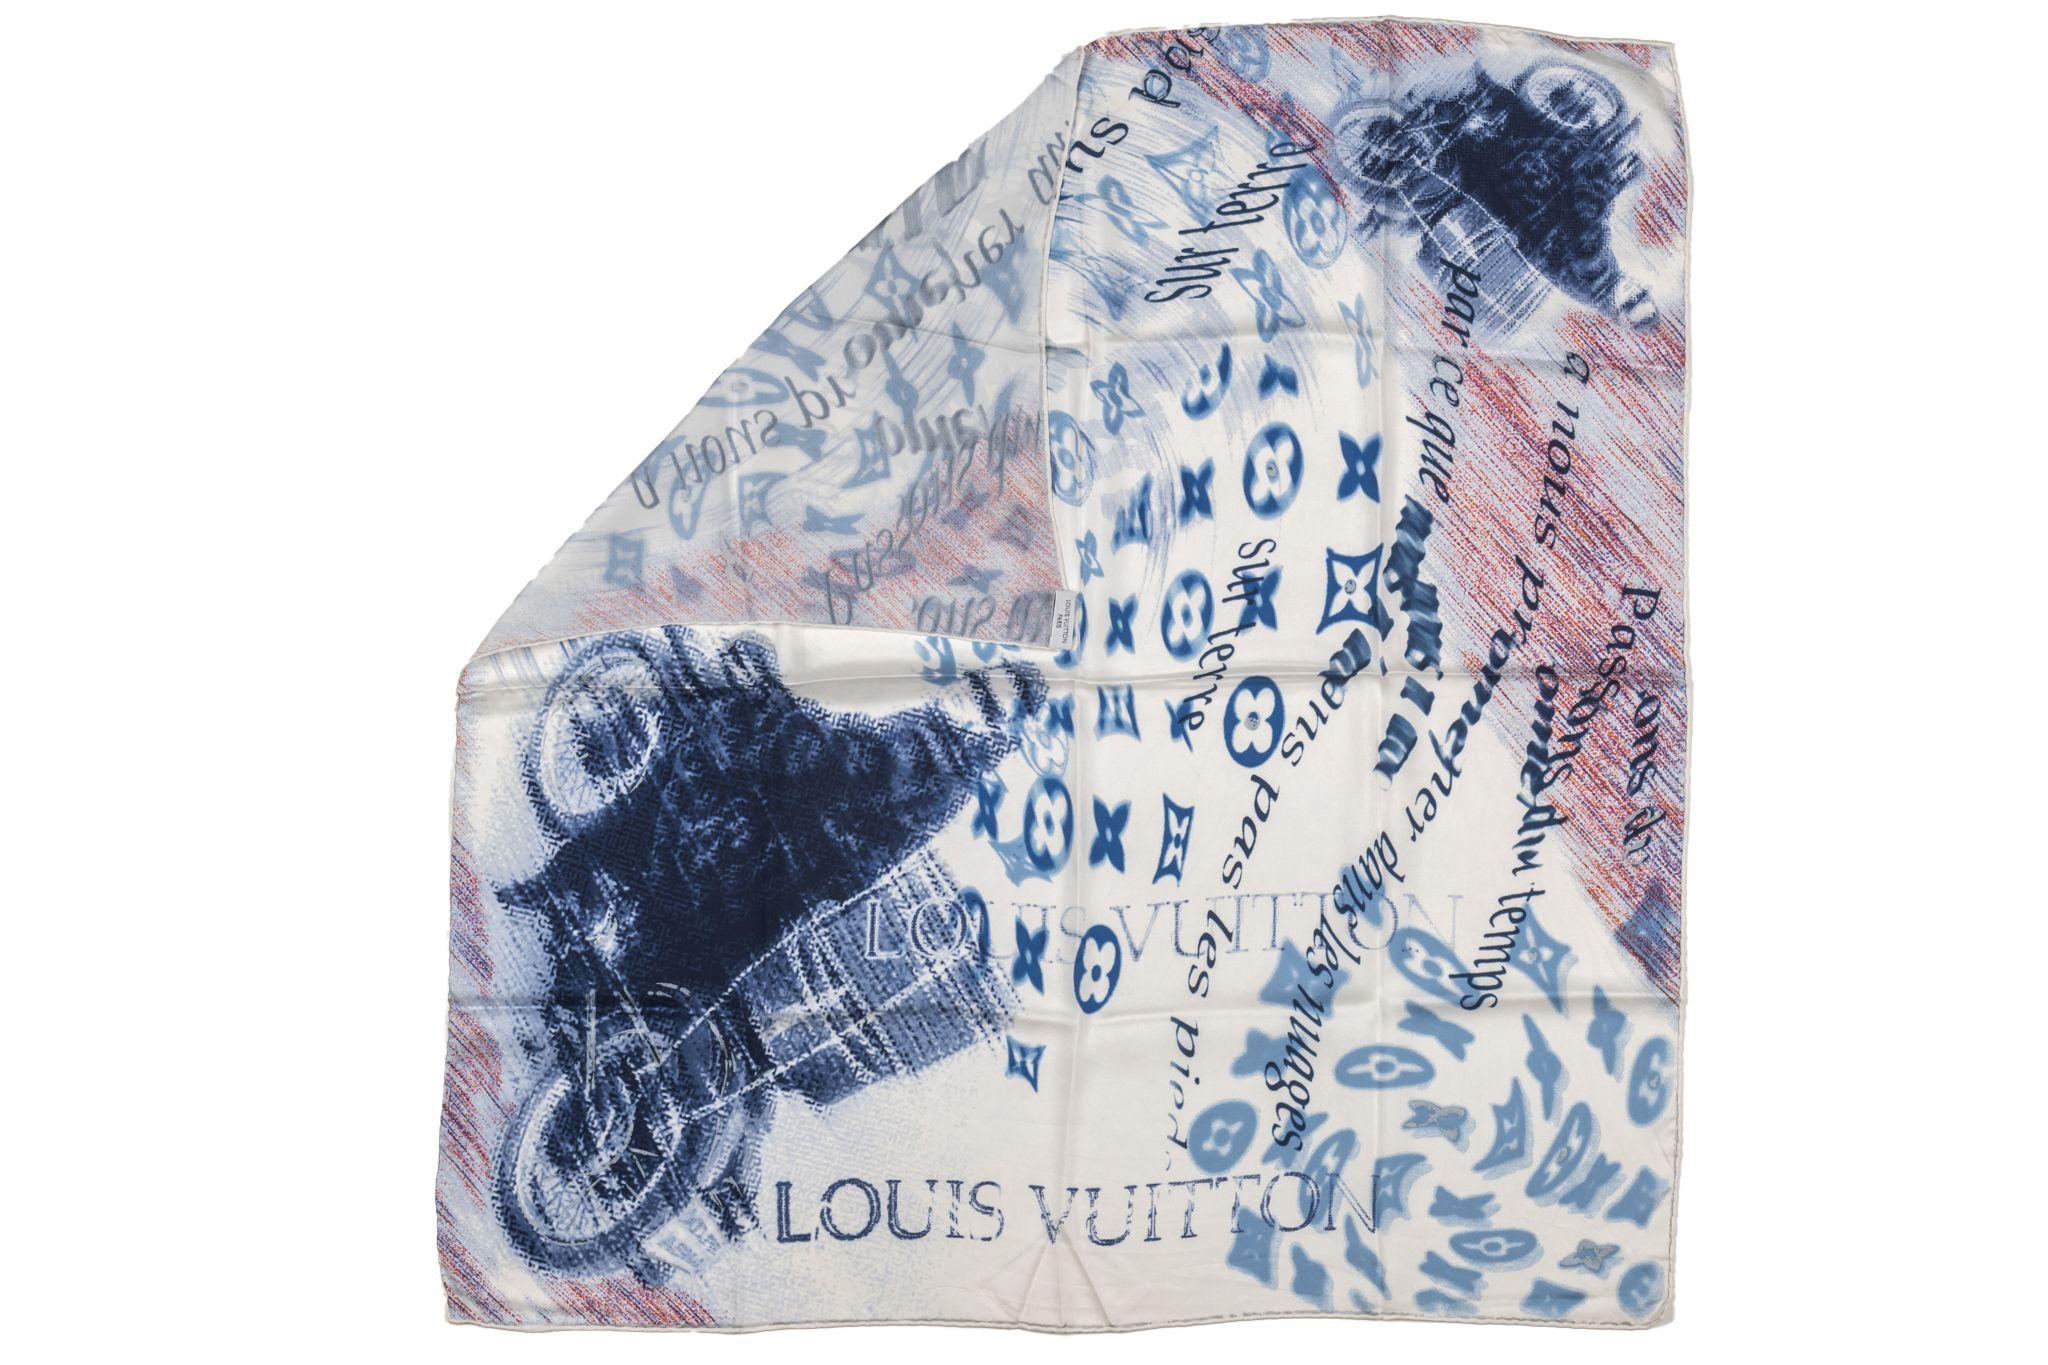 Louis Vuitton Motorcycle Silk Scarf. The pattern features a graffiti of a motorcycle and the LV logos. The item is in excellent condition.